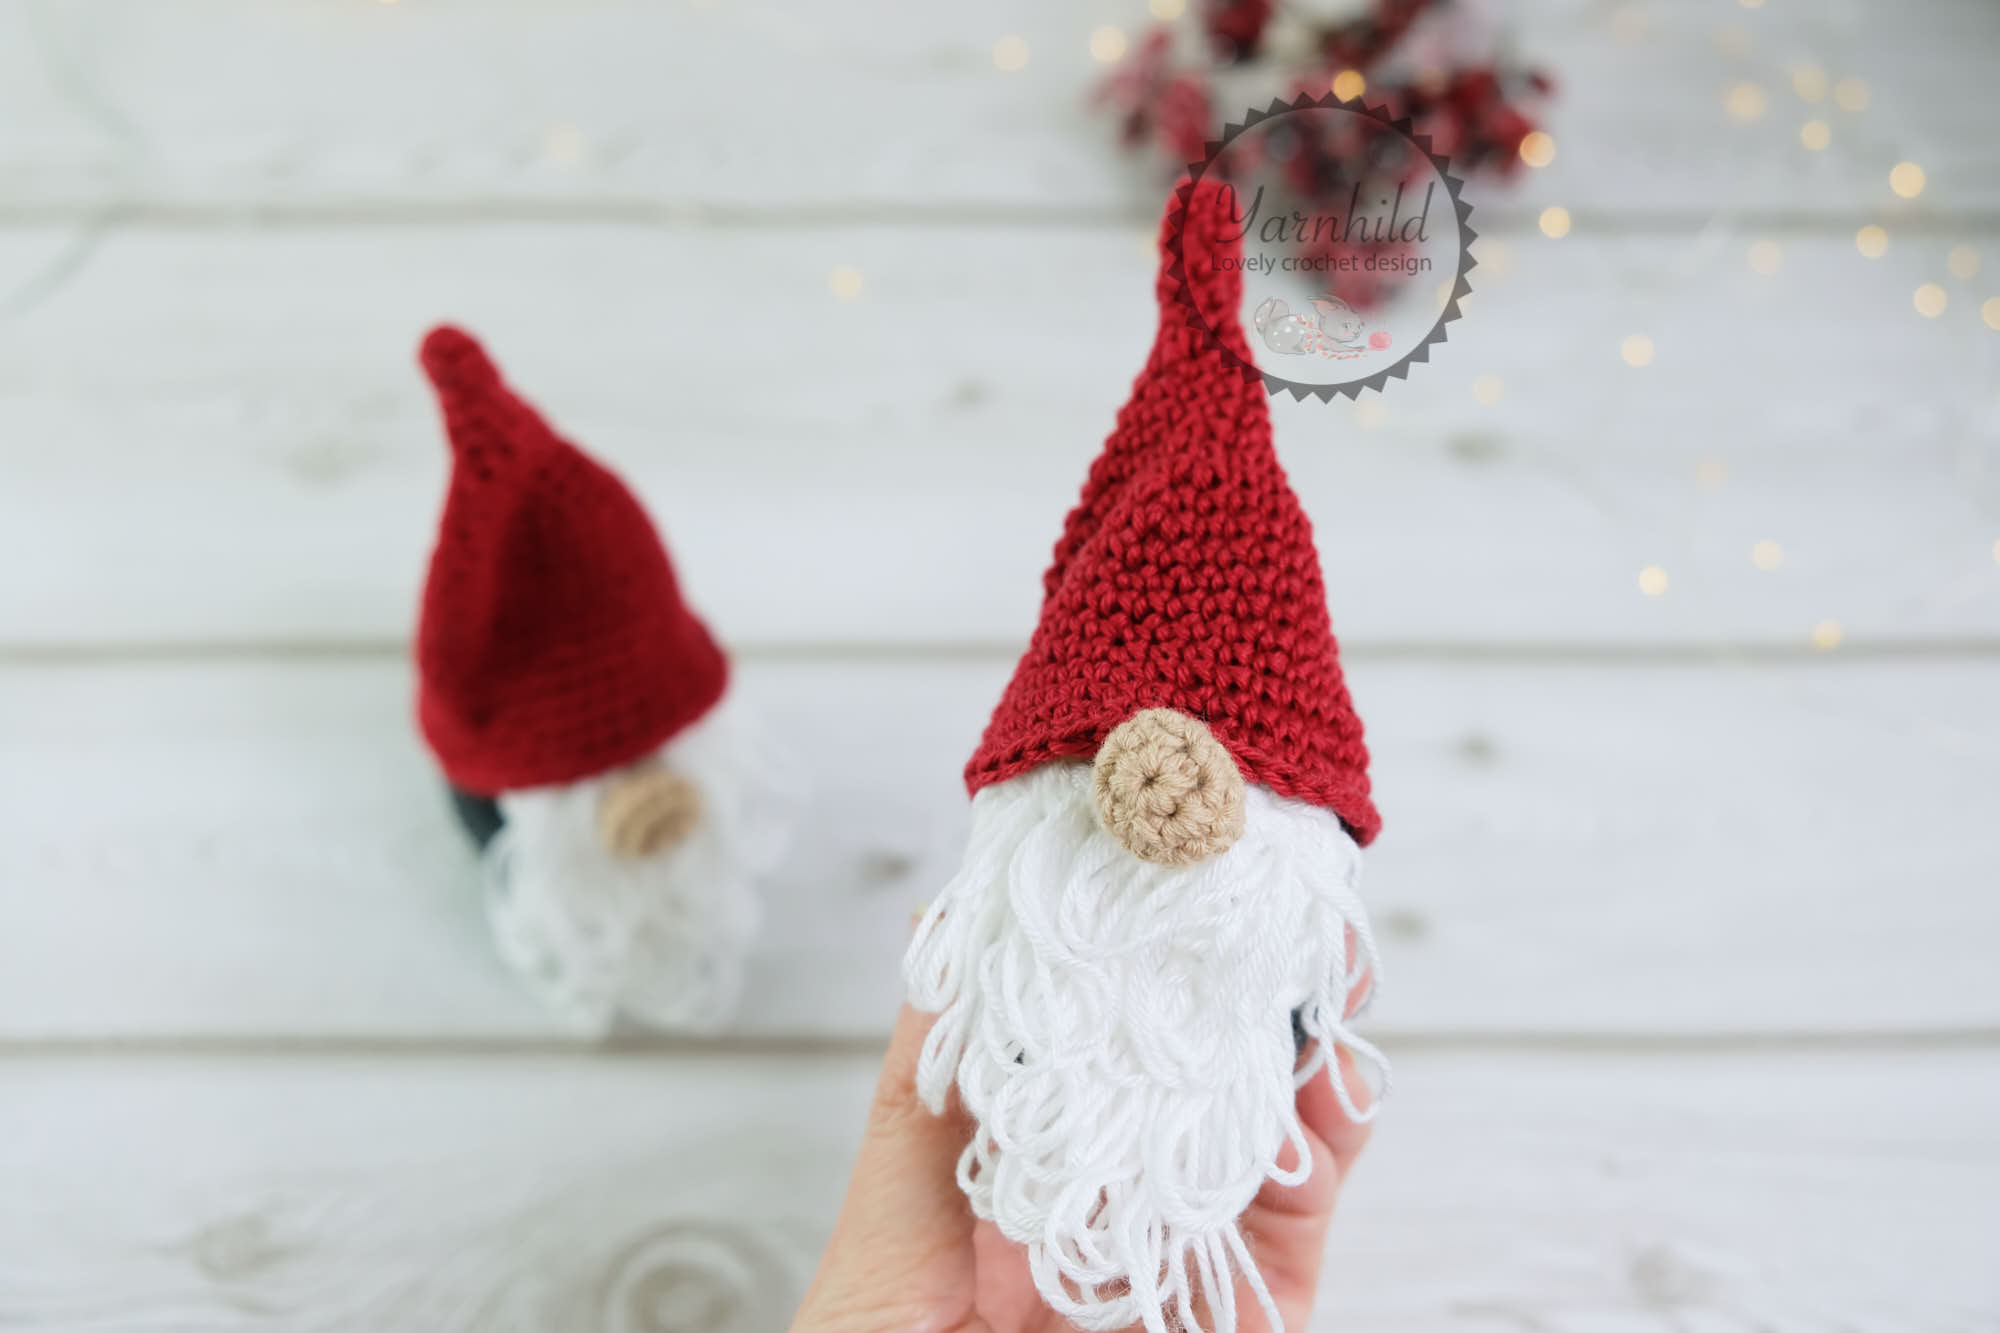 How to crochet a gnome- free video tutorial for a crochet gnome